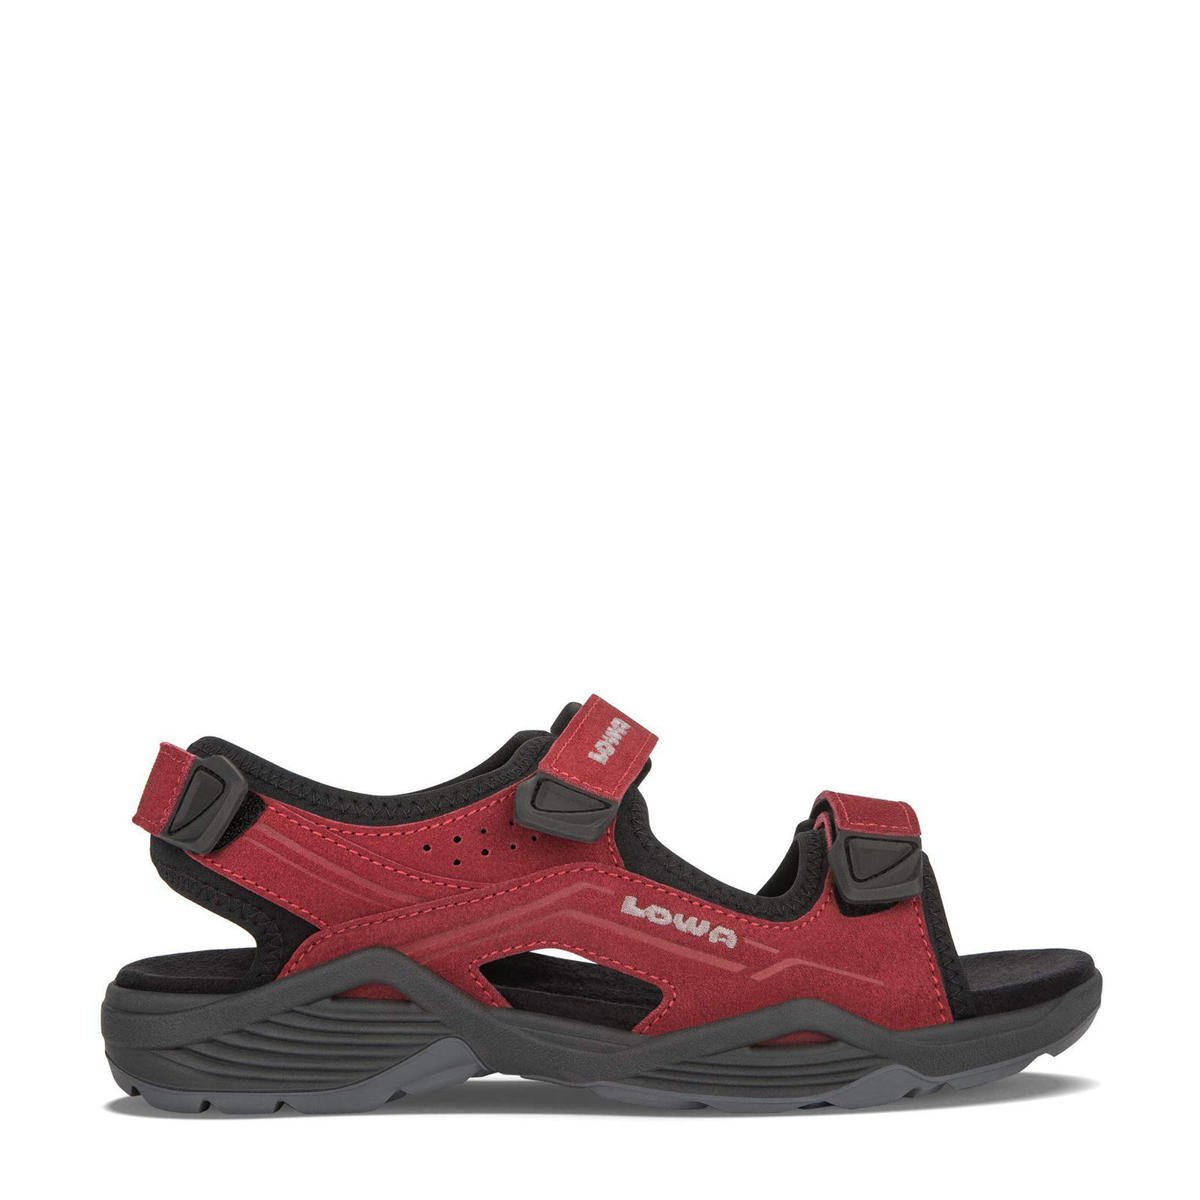 band Uitputting Trouwens Lowa Duralto LE outdoor sandalen rood | wehkamp